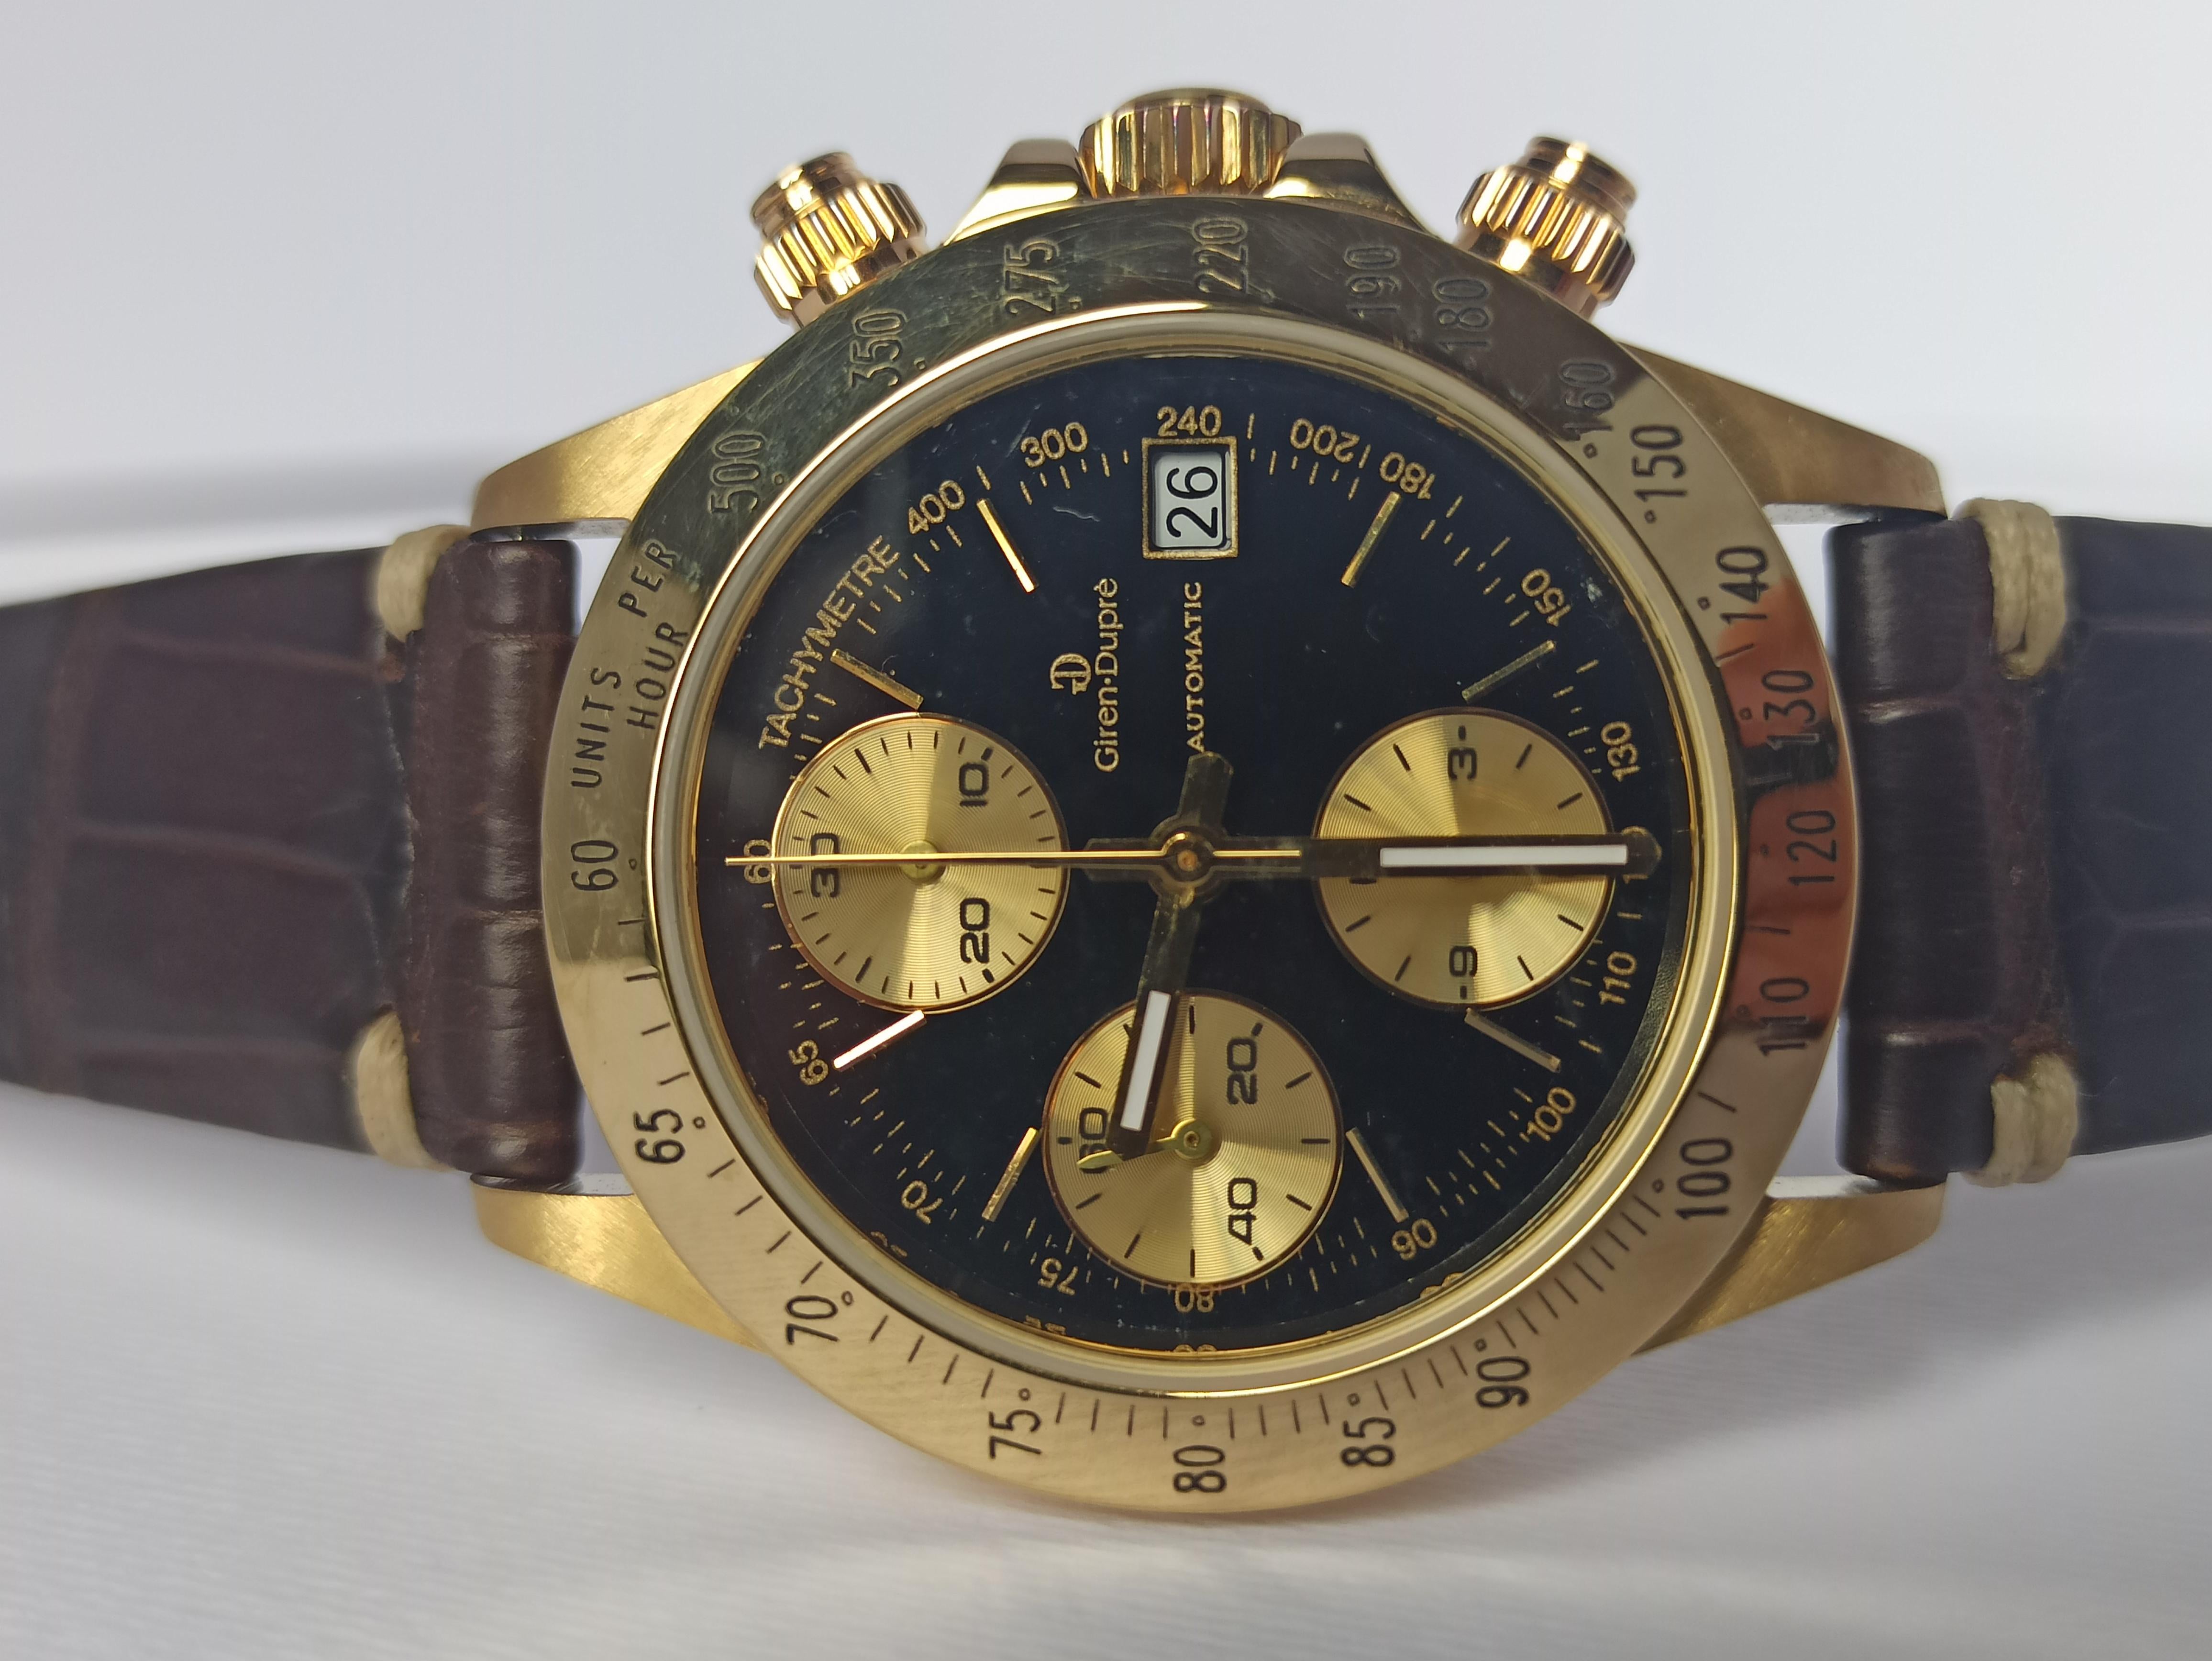 Giren Dupre' 18kt Solid Gold Daytona Style Chronograph, Leather Strap, Automatic For Sale 4